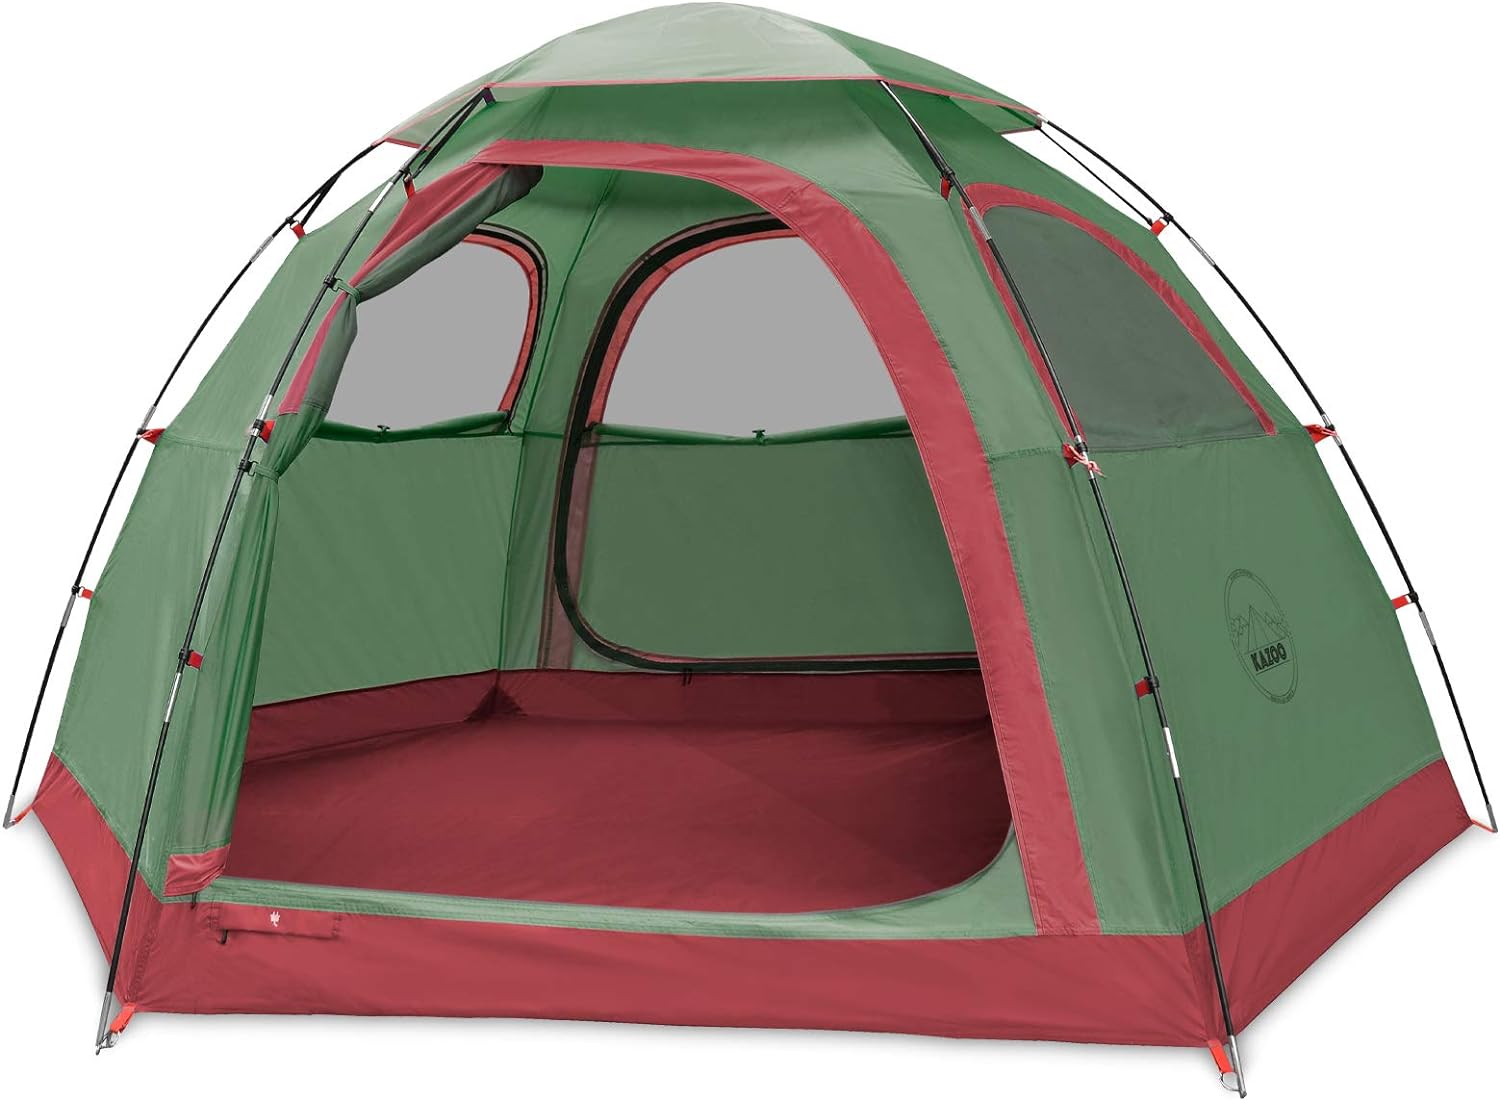 Camping Tent Review: Find the Perfect Shelter for Your Outdoor Adventures